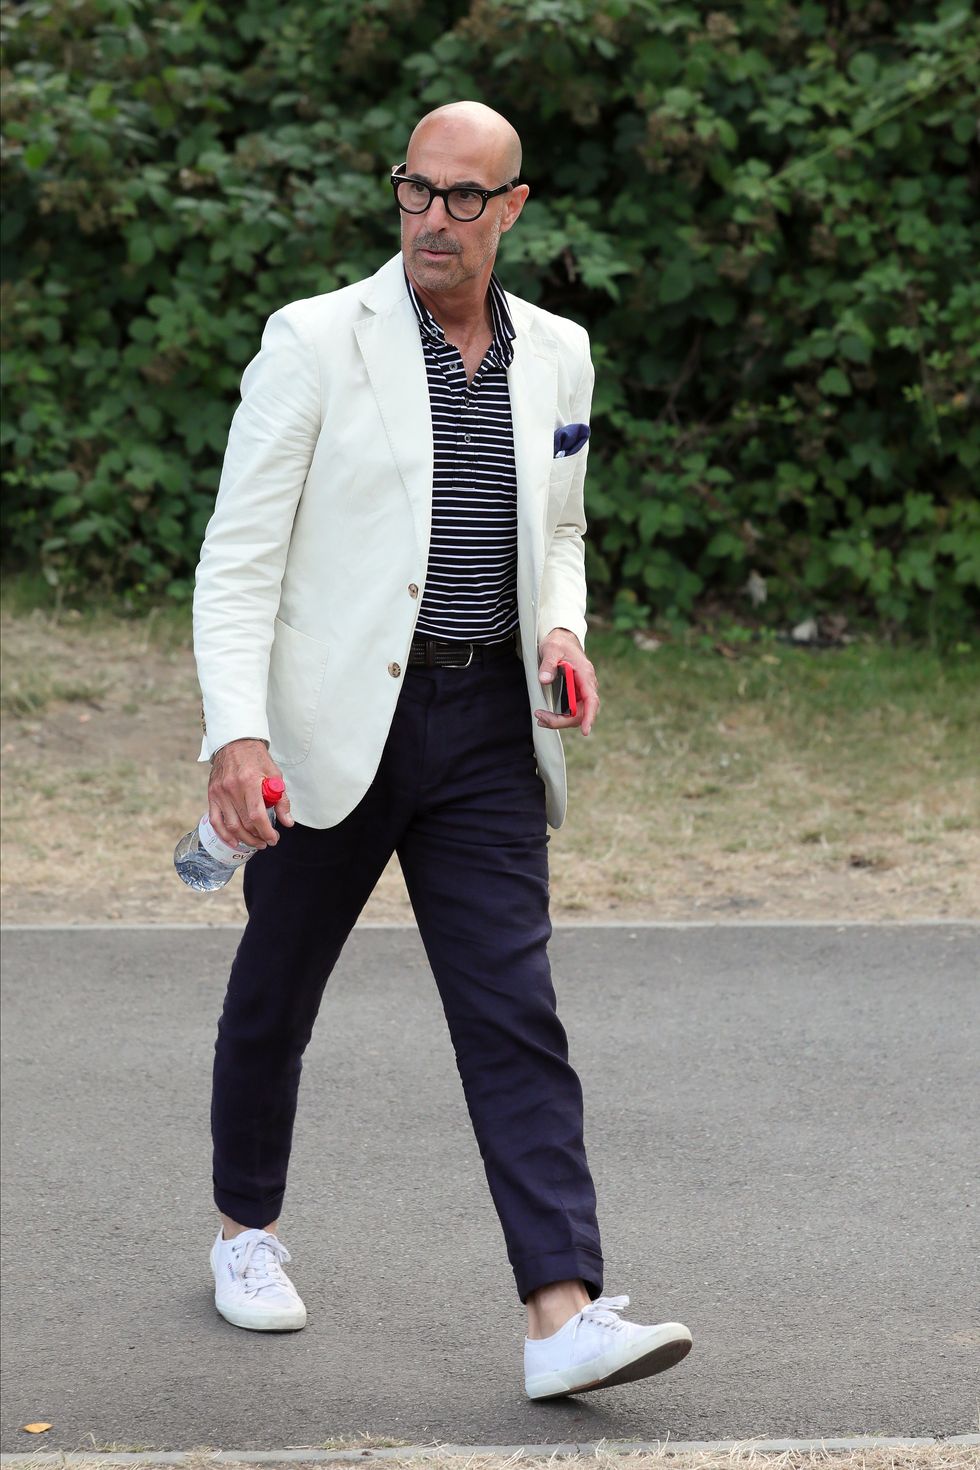 https://hips.hearstapps.com/hmg-prod/images/stanley-tucci-attends-mens-final-day-at-the-wimbledon-2019-news-photo-1590591295.jpg?resize=980:*